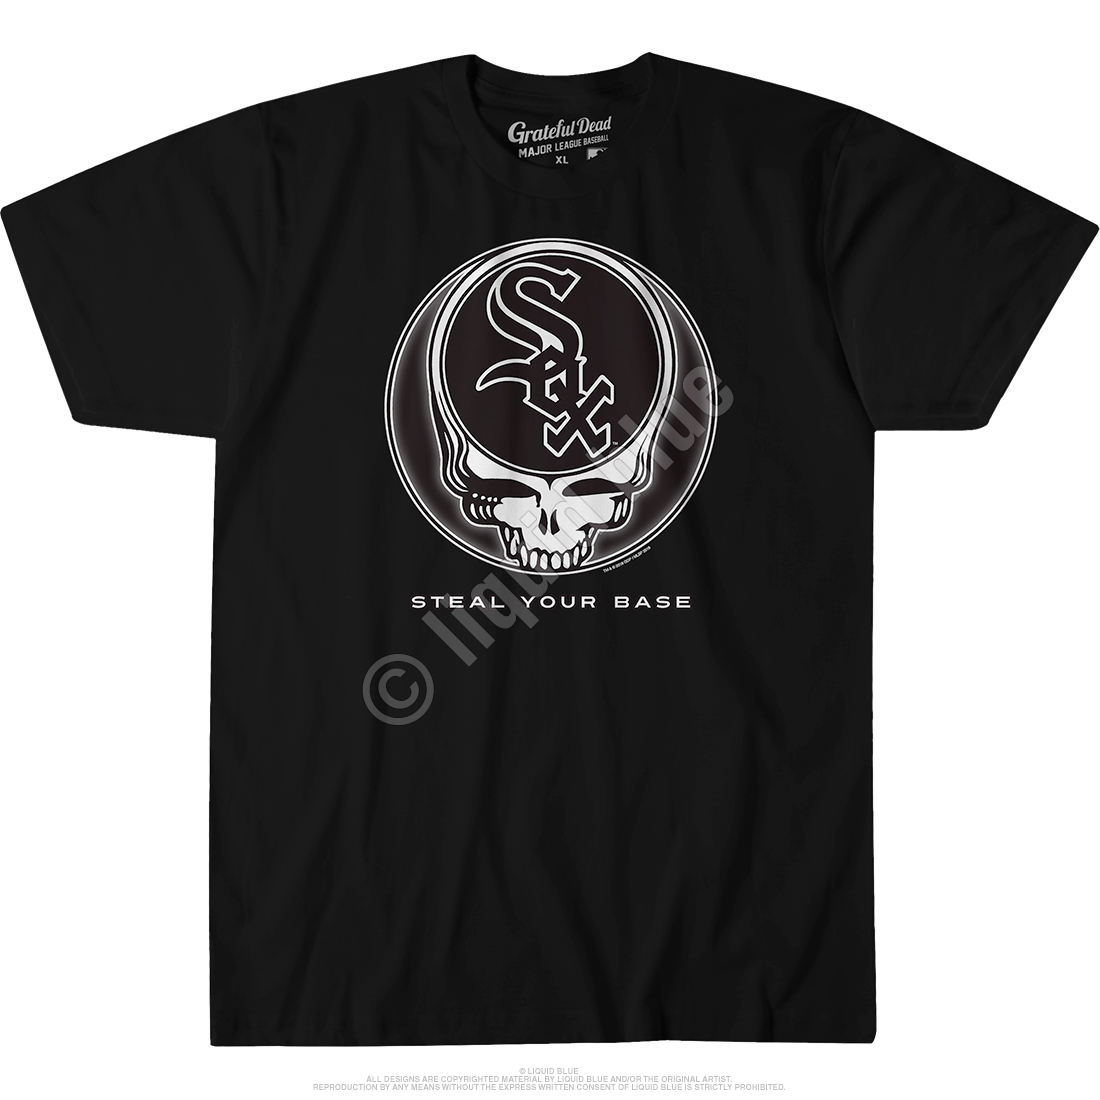 Chicago White Sox Grateful Dead Steal Your Base Shirt